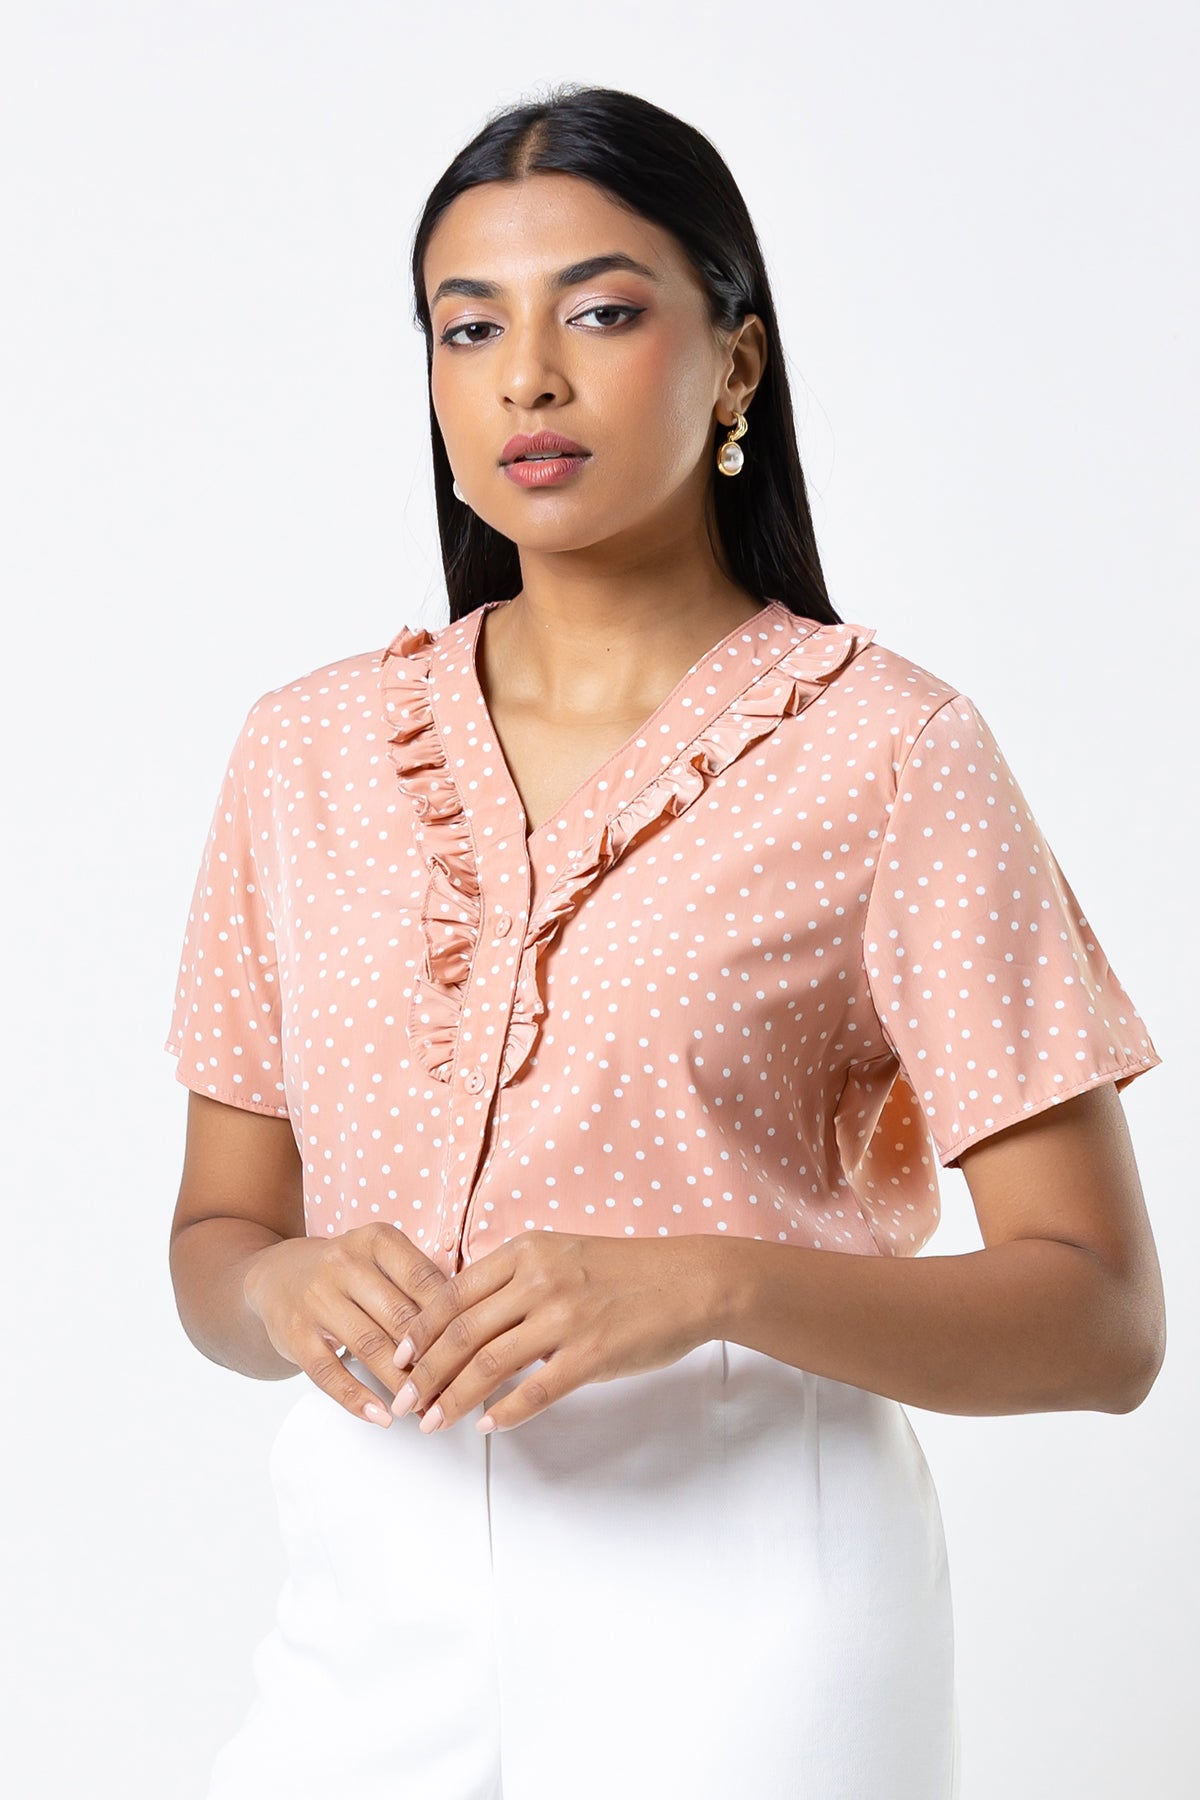 Envogue Women's Short Sleeve With Frill Dotted Office Blouse